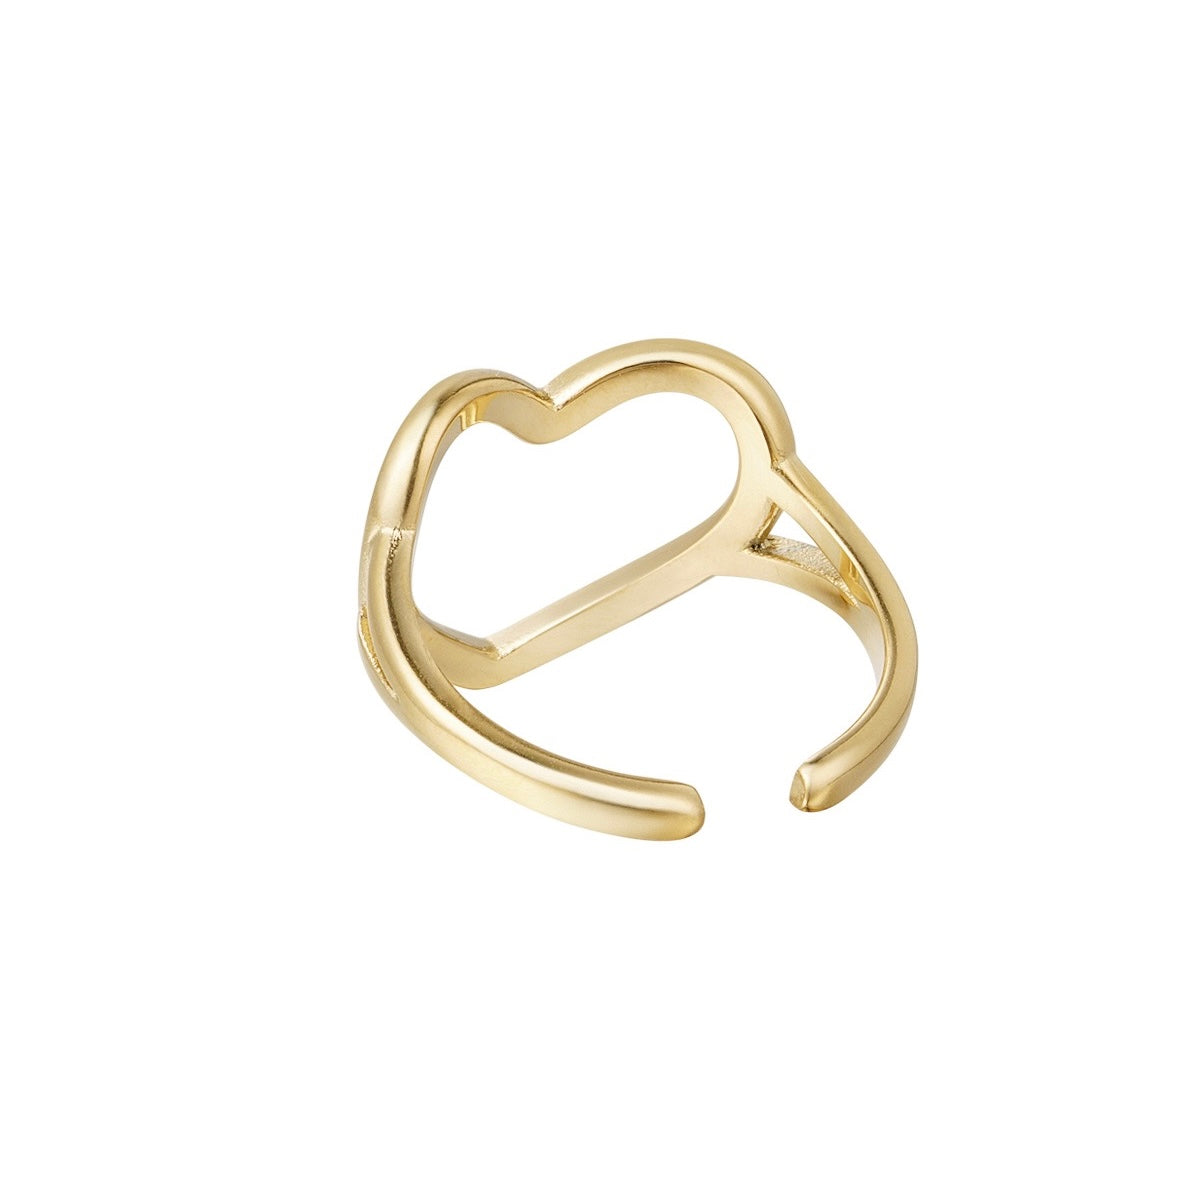 Amore Heart Ring - Gold